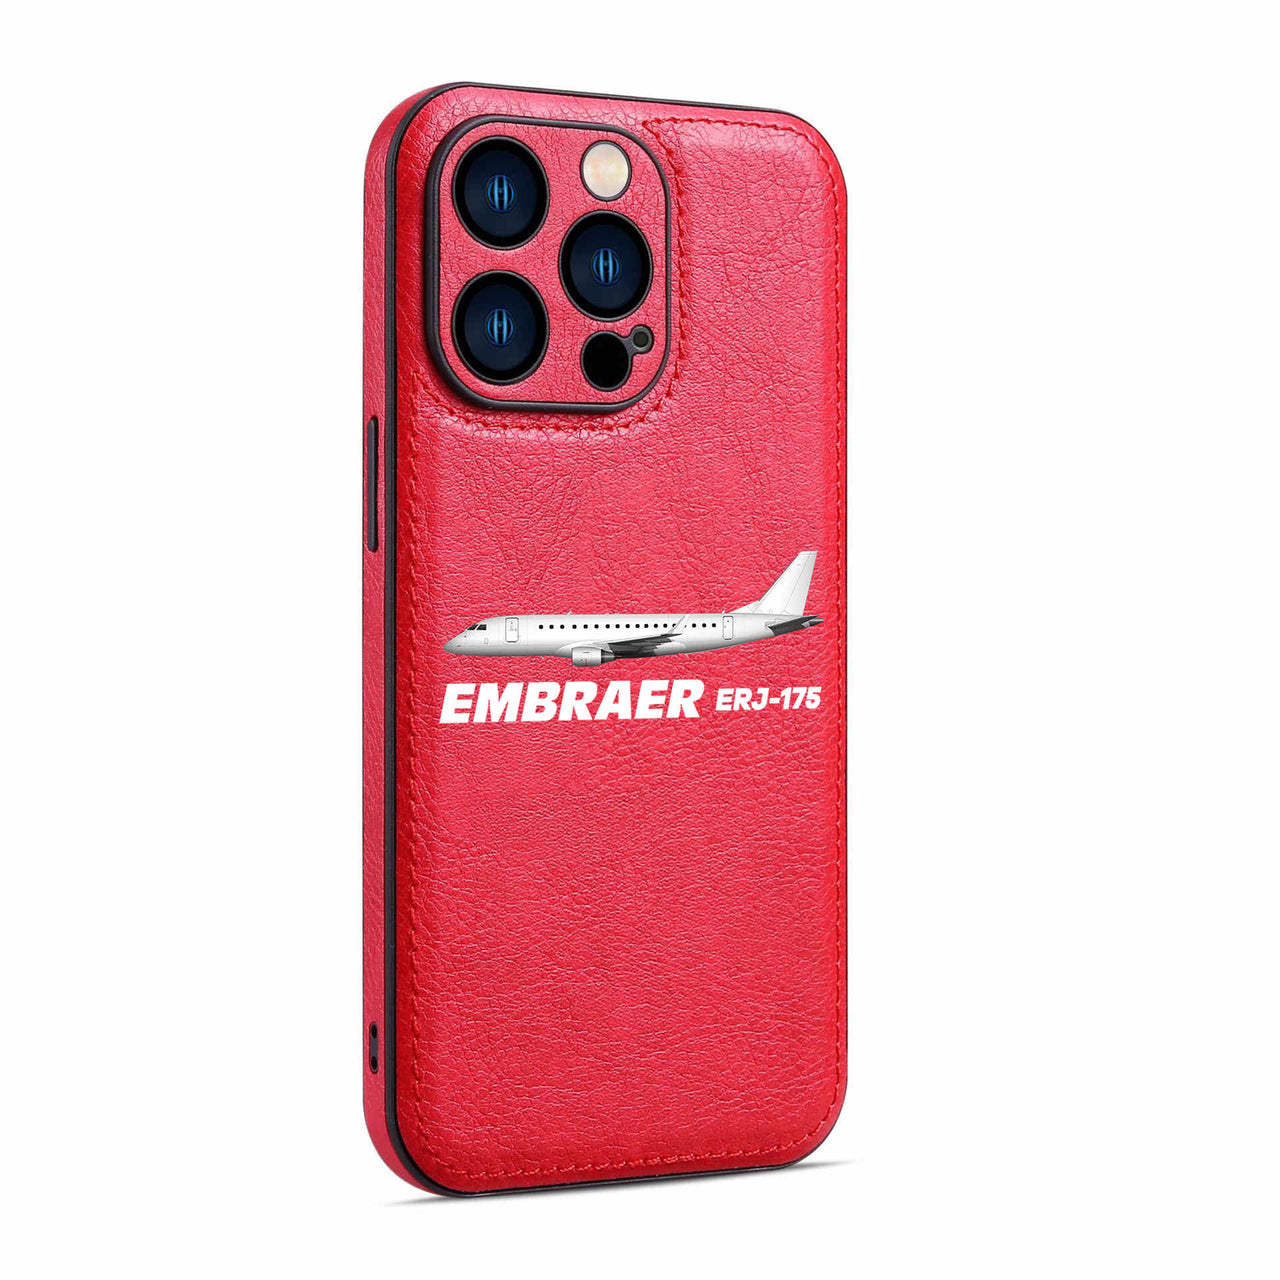 The Embraer ERJ-175 Designed Leather iPhone Cases